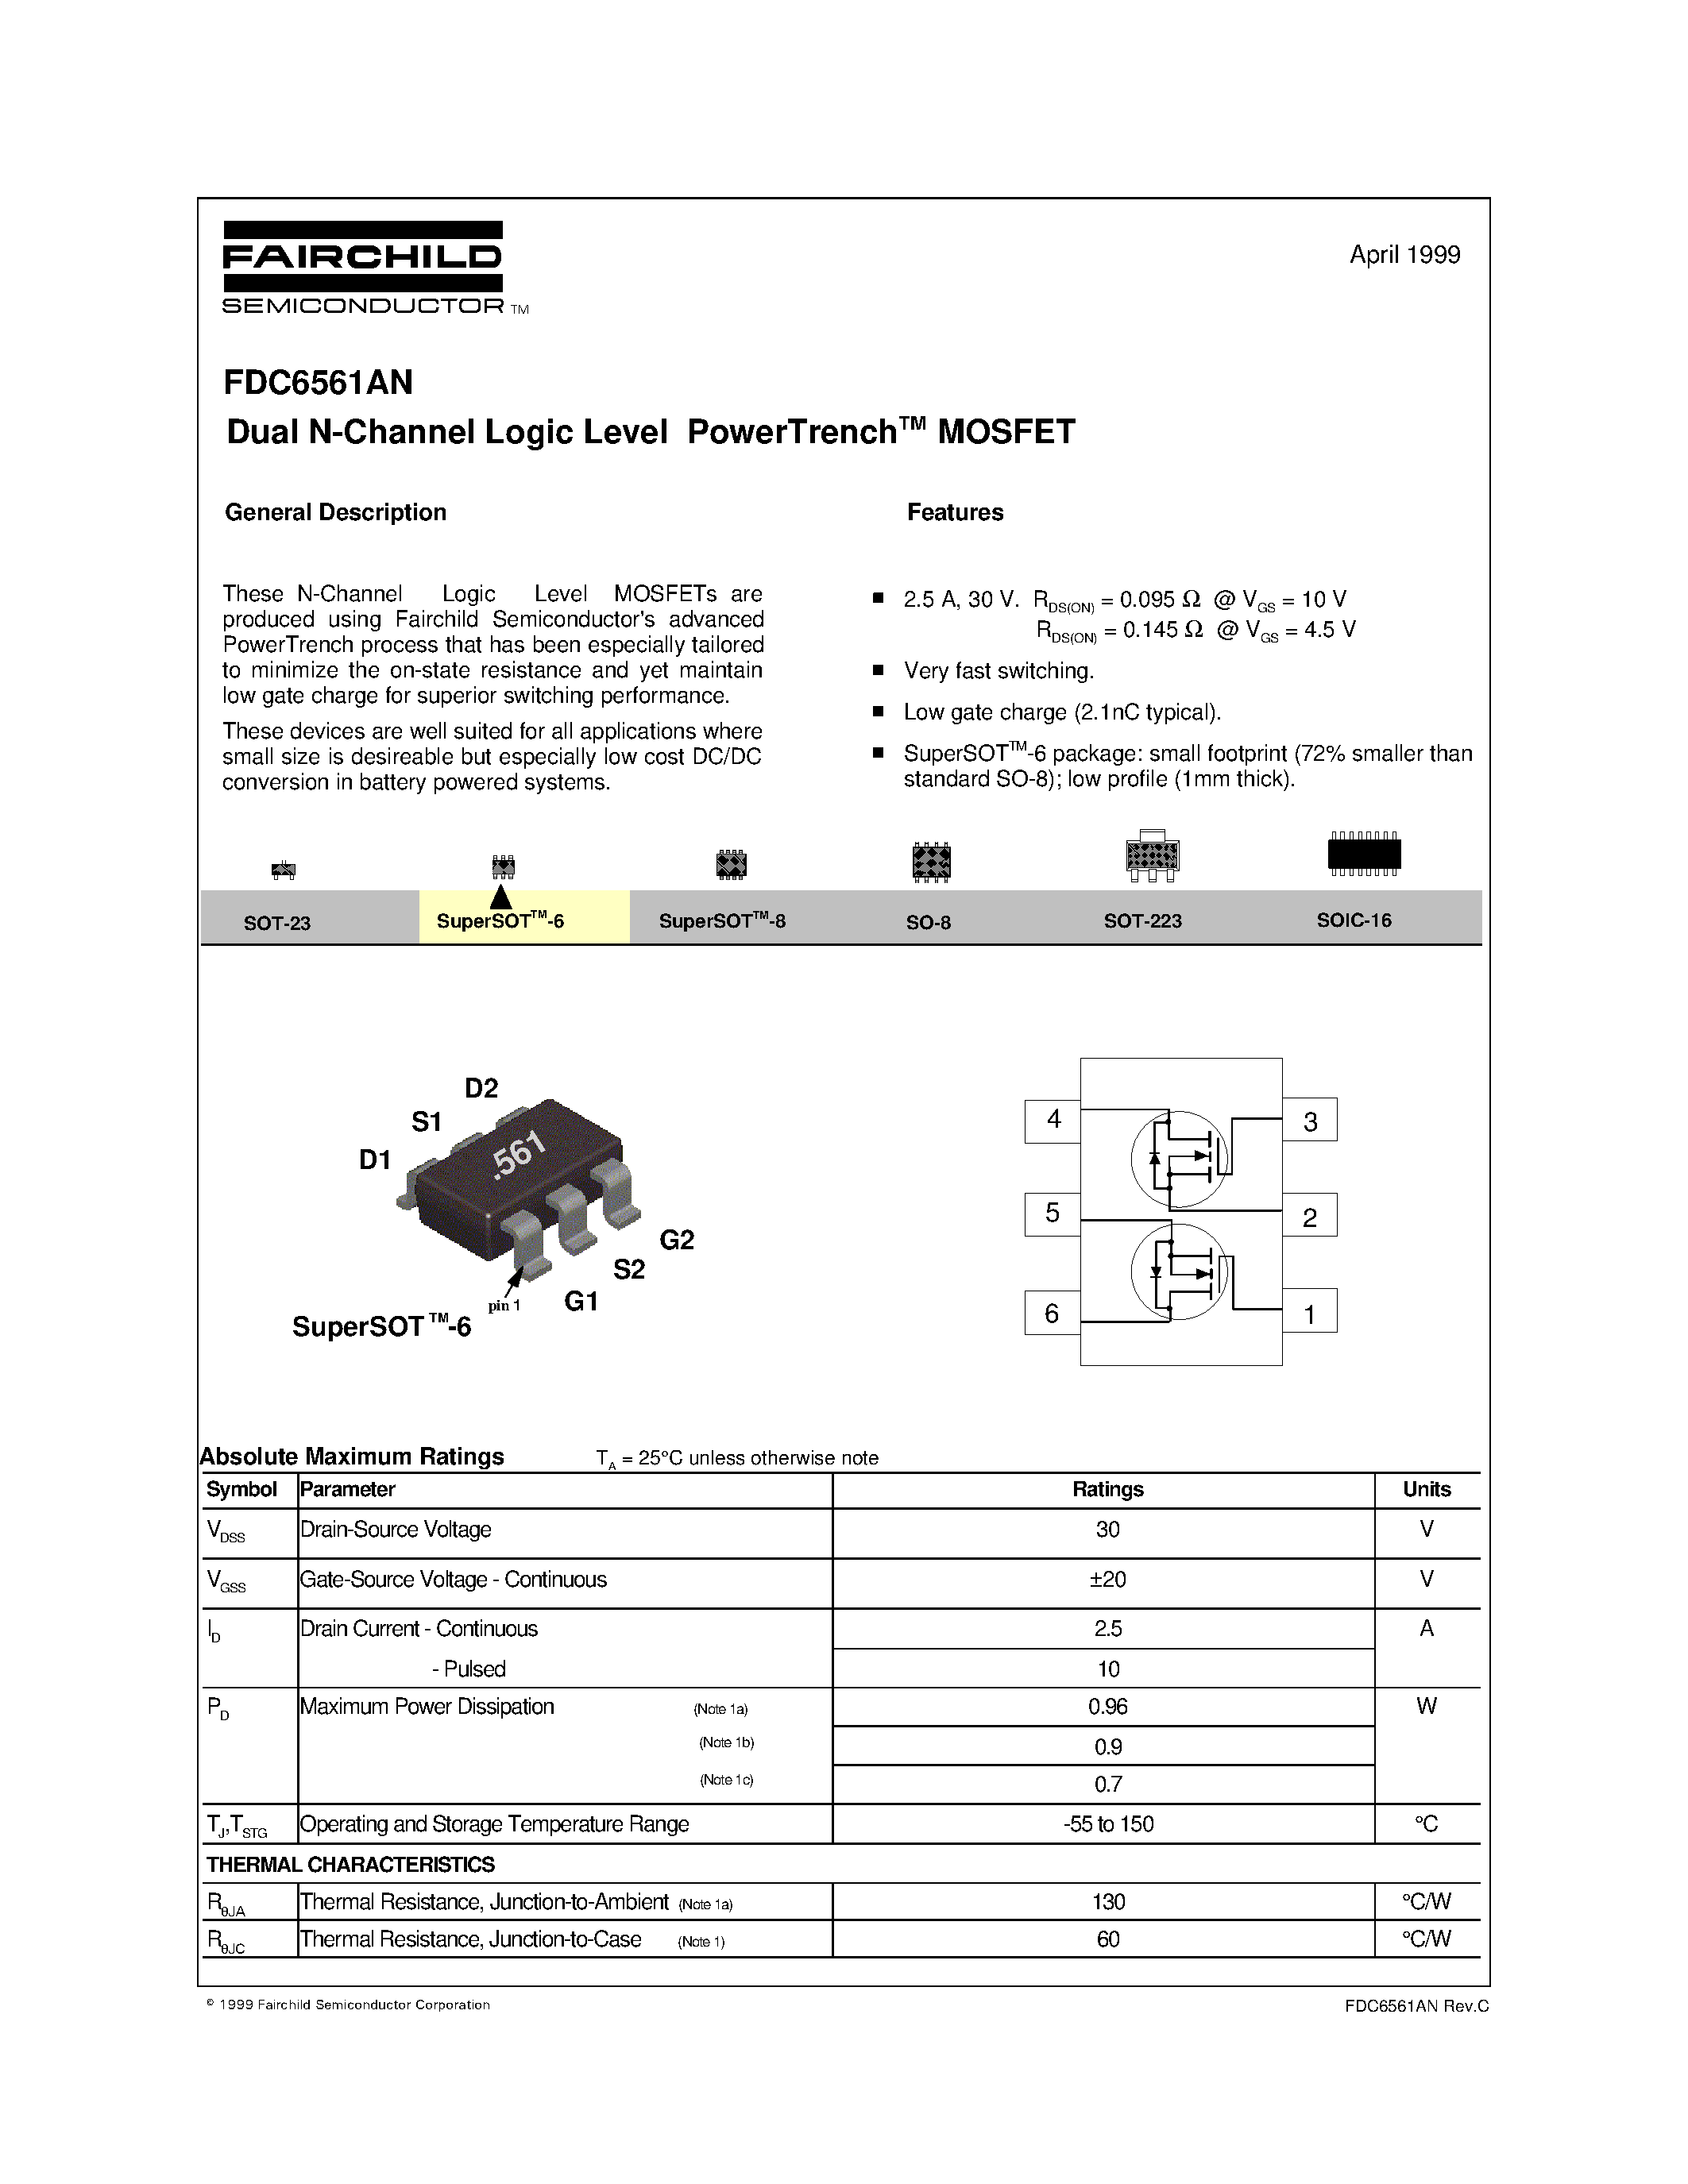 Даташит FDC6561 - Dual N-Channel Logic Level PowerTrenchTM MOSFET страница 1